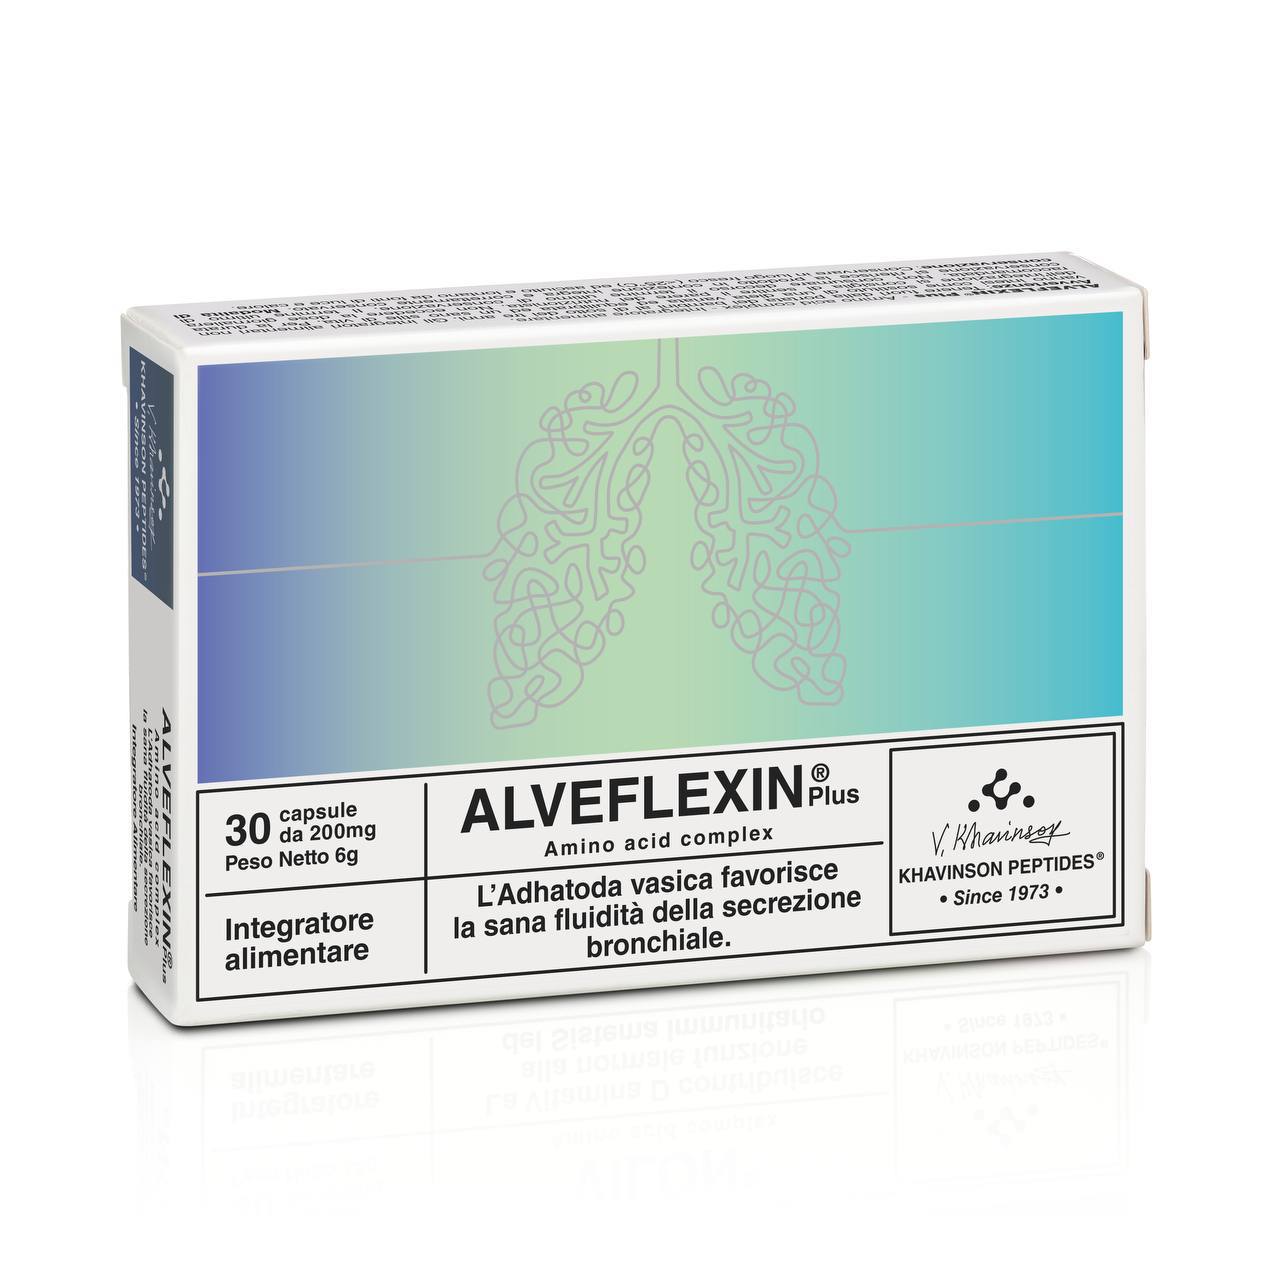 Achieving Respiratory Wellness: ALVEFLEXIN®Plus and the Normalization of the Functional State of the Respiratory System